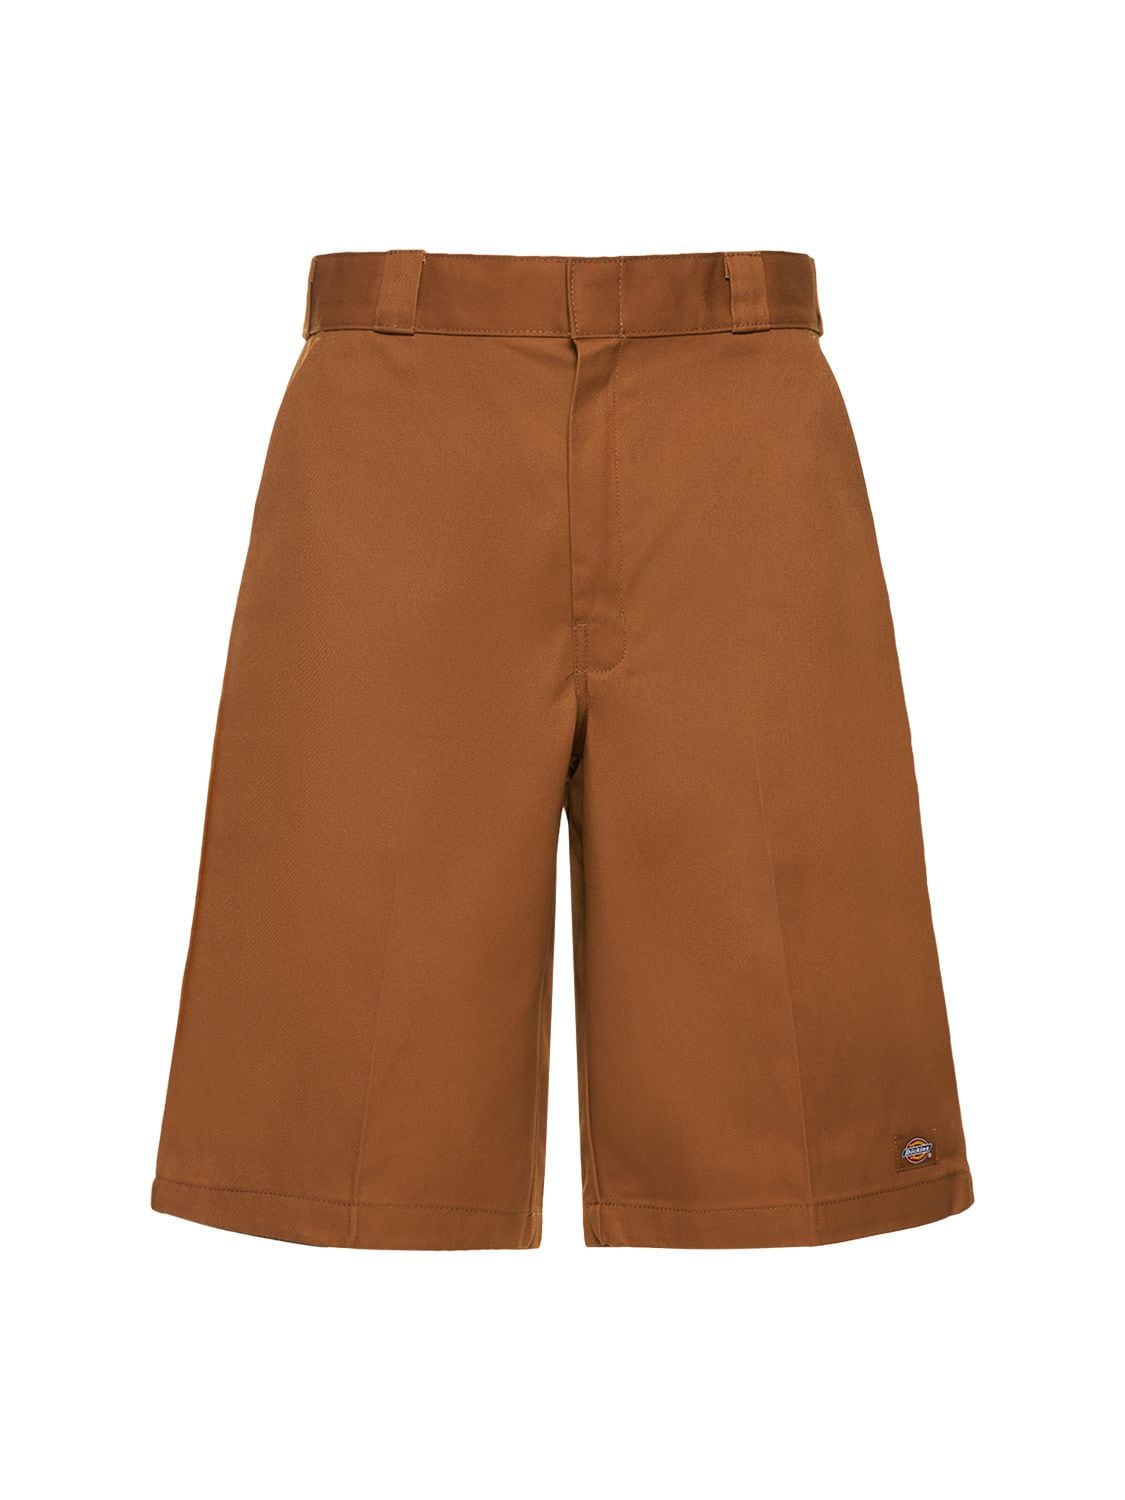 Dickies 13" Multi Pocket Cotton Blend Shorts In Brown Duck